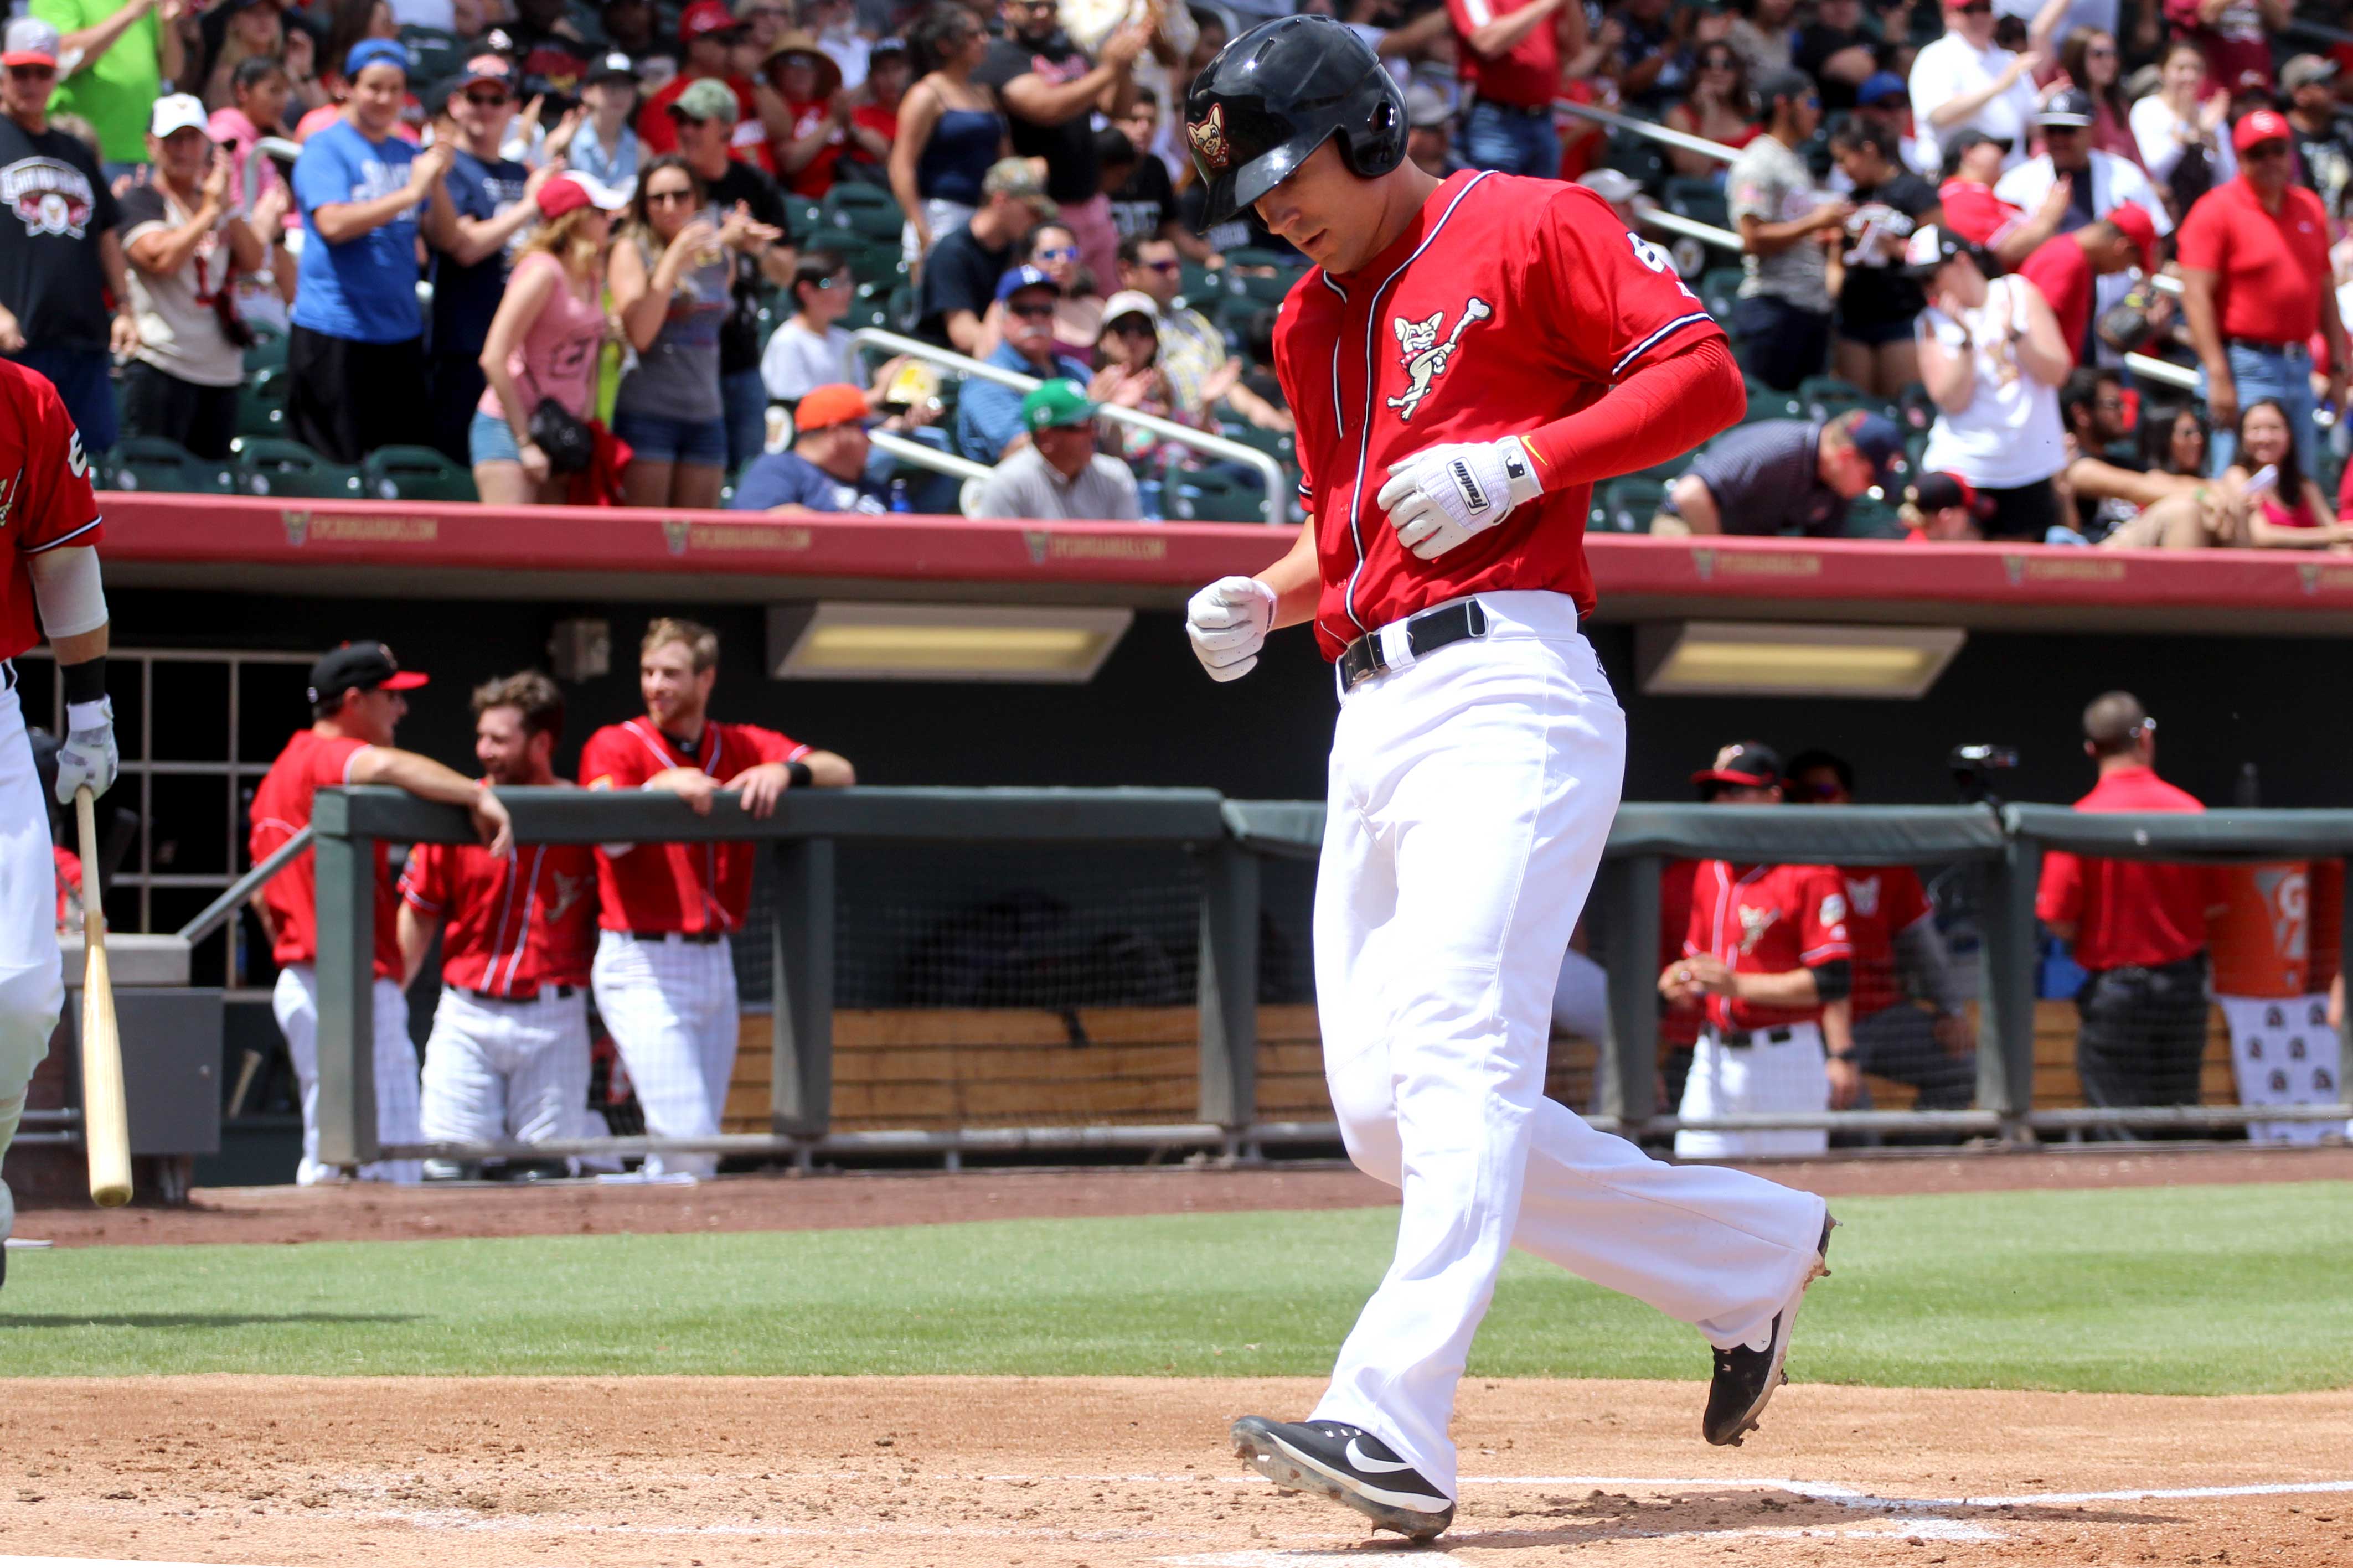 Chihuahuas+pitching+overcomes+51s